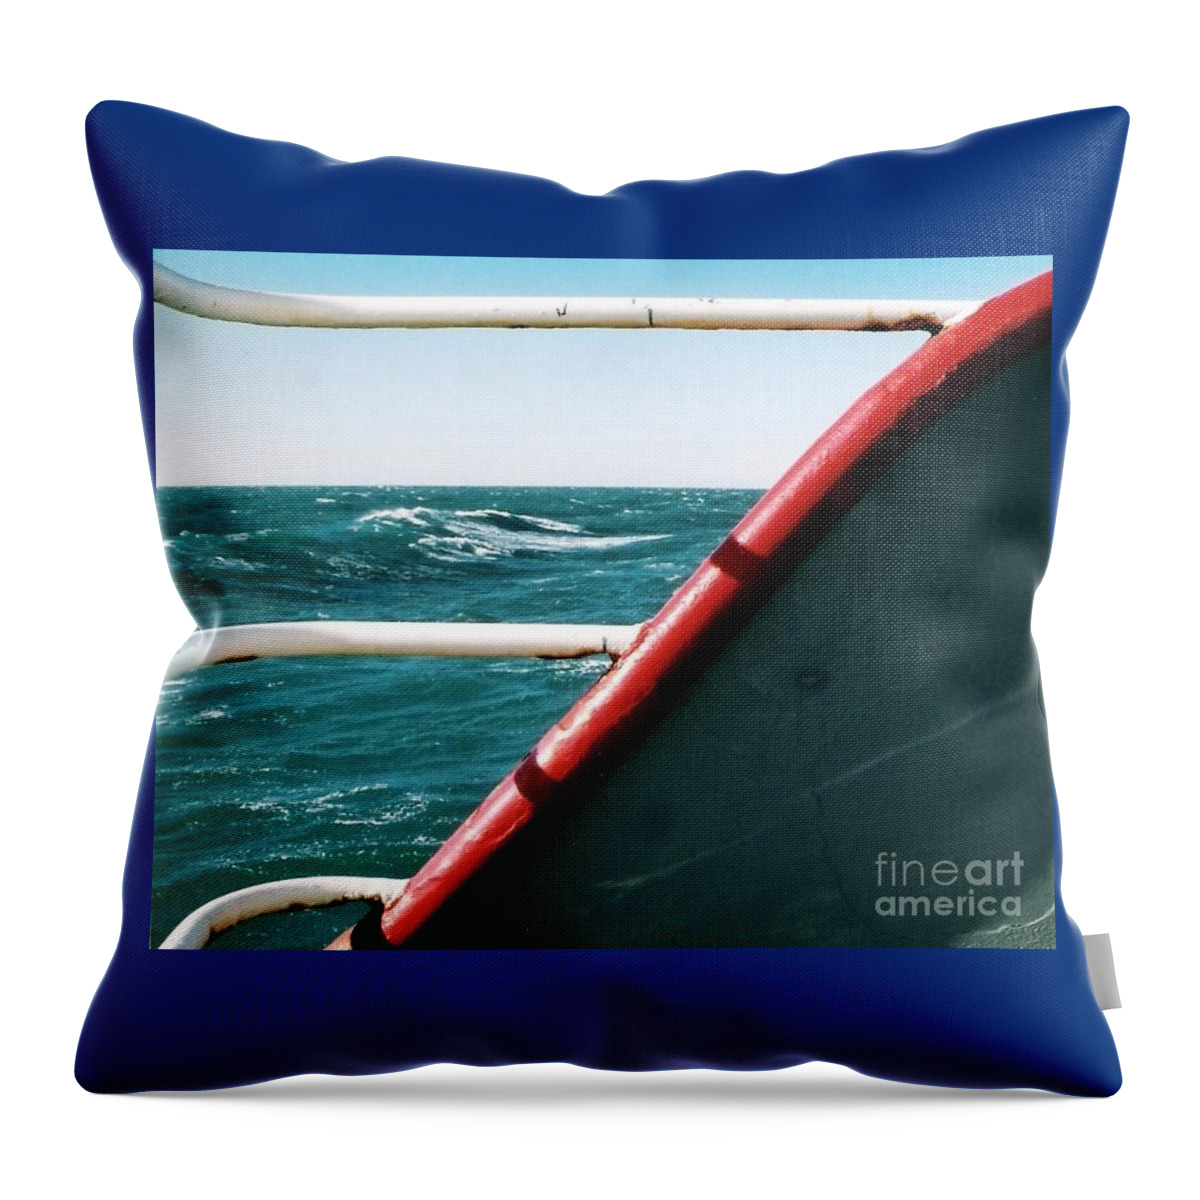 Gulf Of Mexico Throw Pillow featuring the photograph Deep Blue Sea Of The Gulf Of Mexico Off The Coast Of Louisiana Louisiana by Michael Hoard